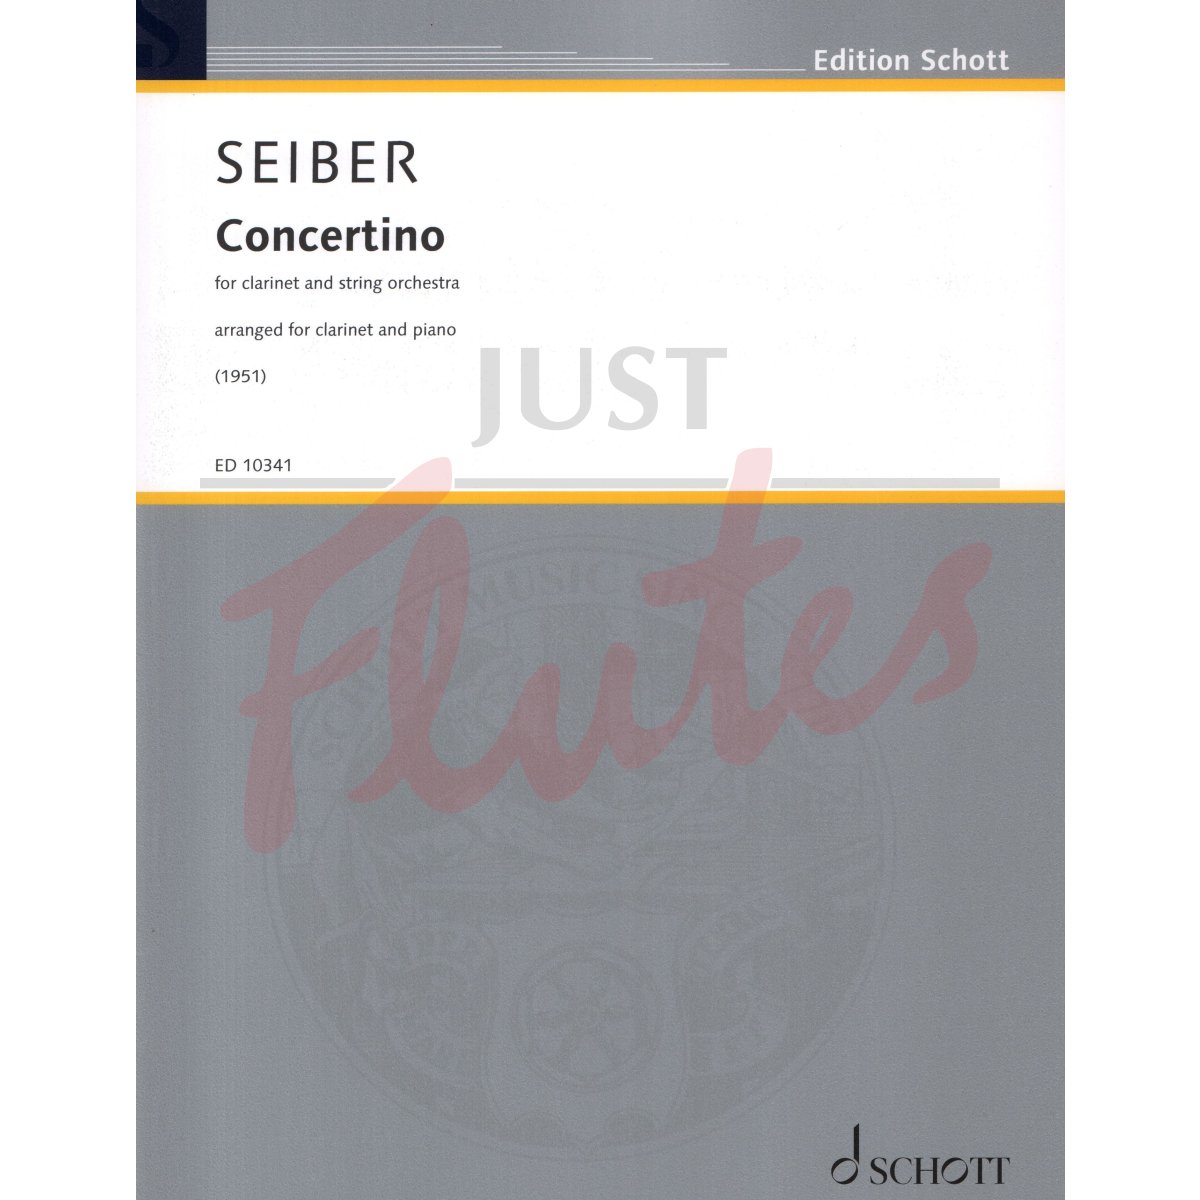 Concertino for Clarinet and Piano